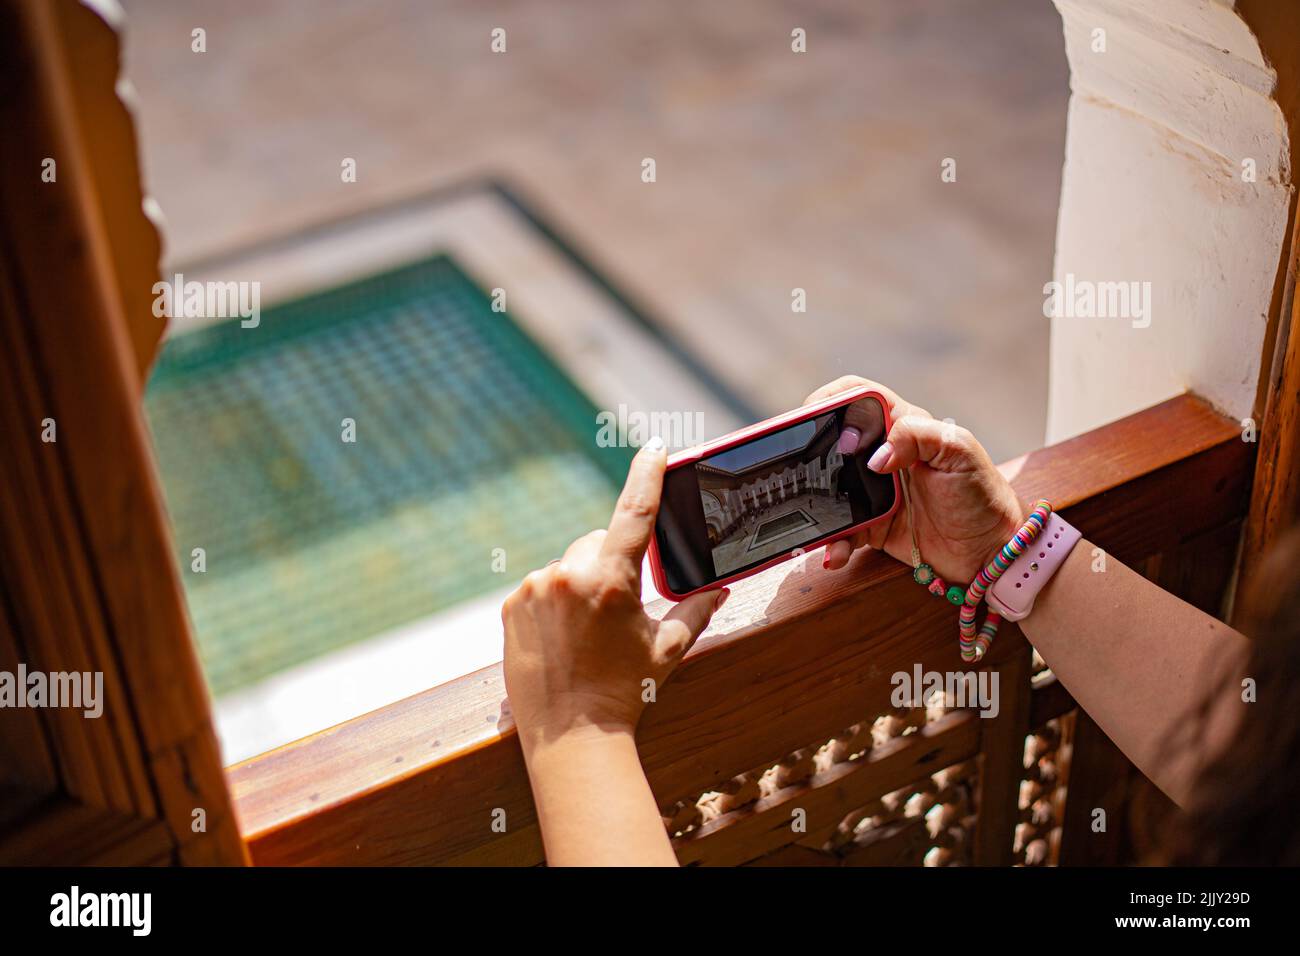 Taking a picture with a smart phone handheld at the edge of a window on a touristic place in Marrakesh, Morocco Stock Photo